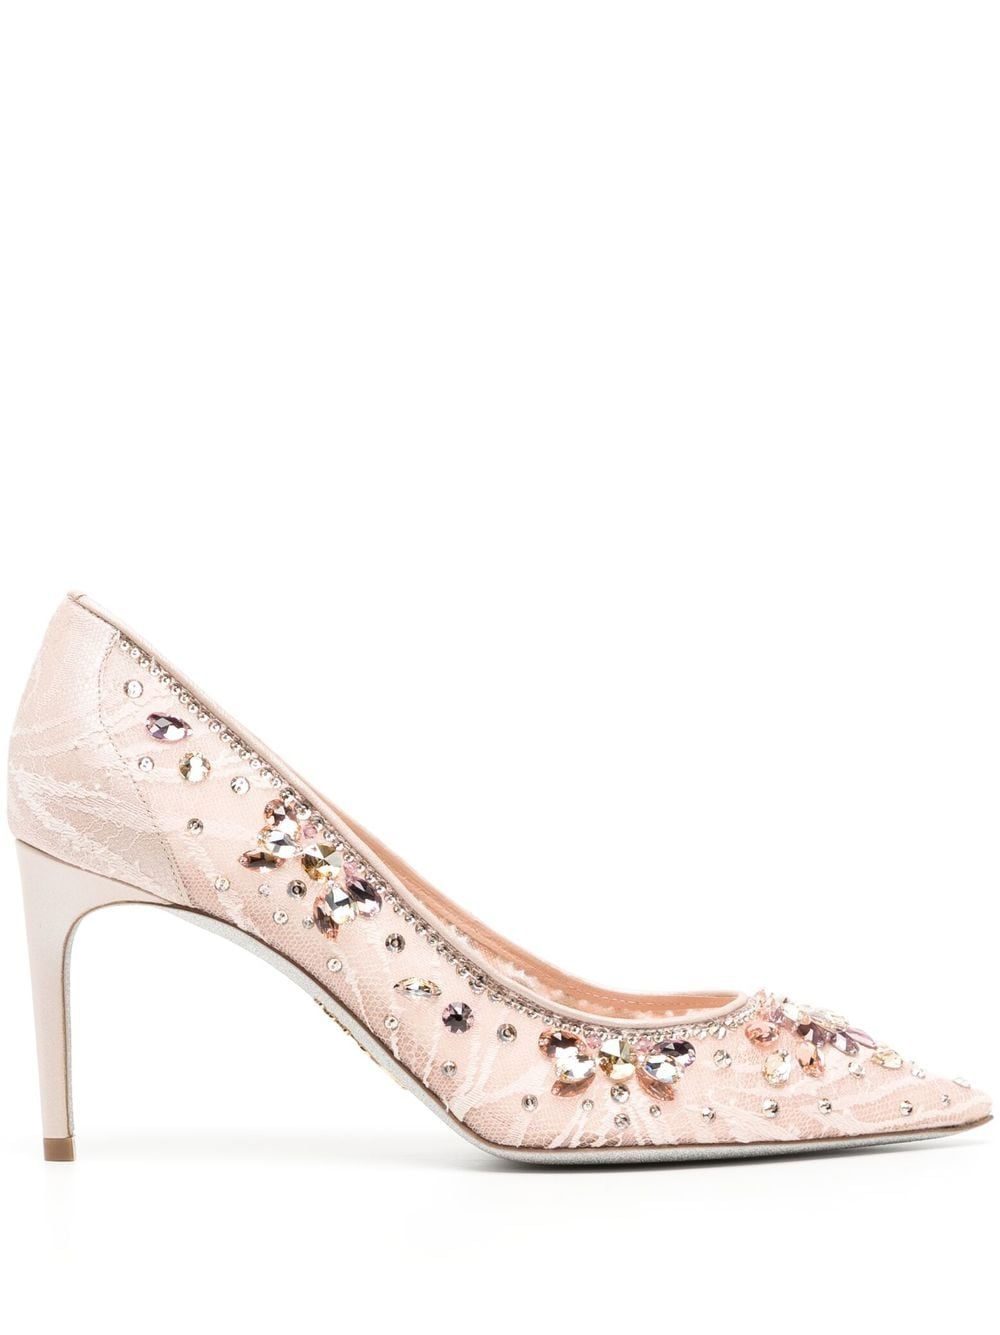 René Caovilla Lace Embellished Crystal Pumps In Pink